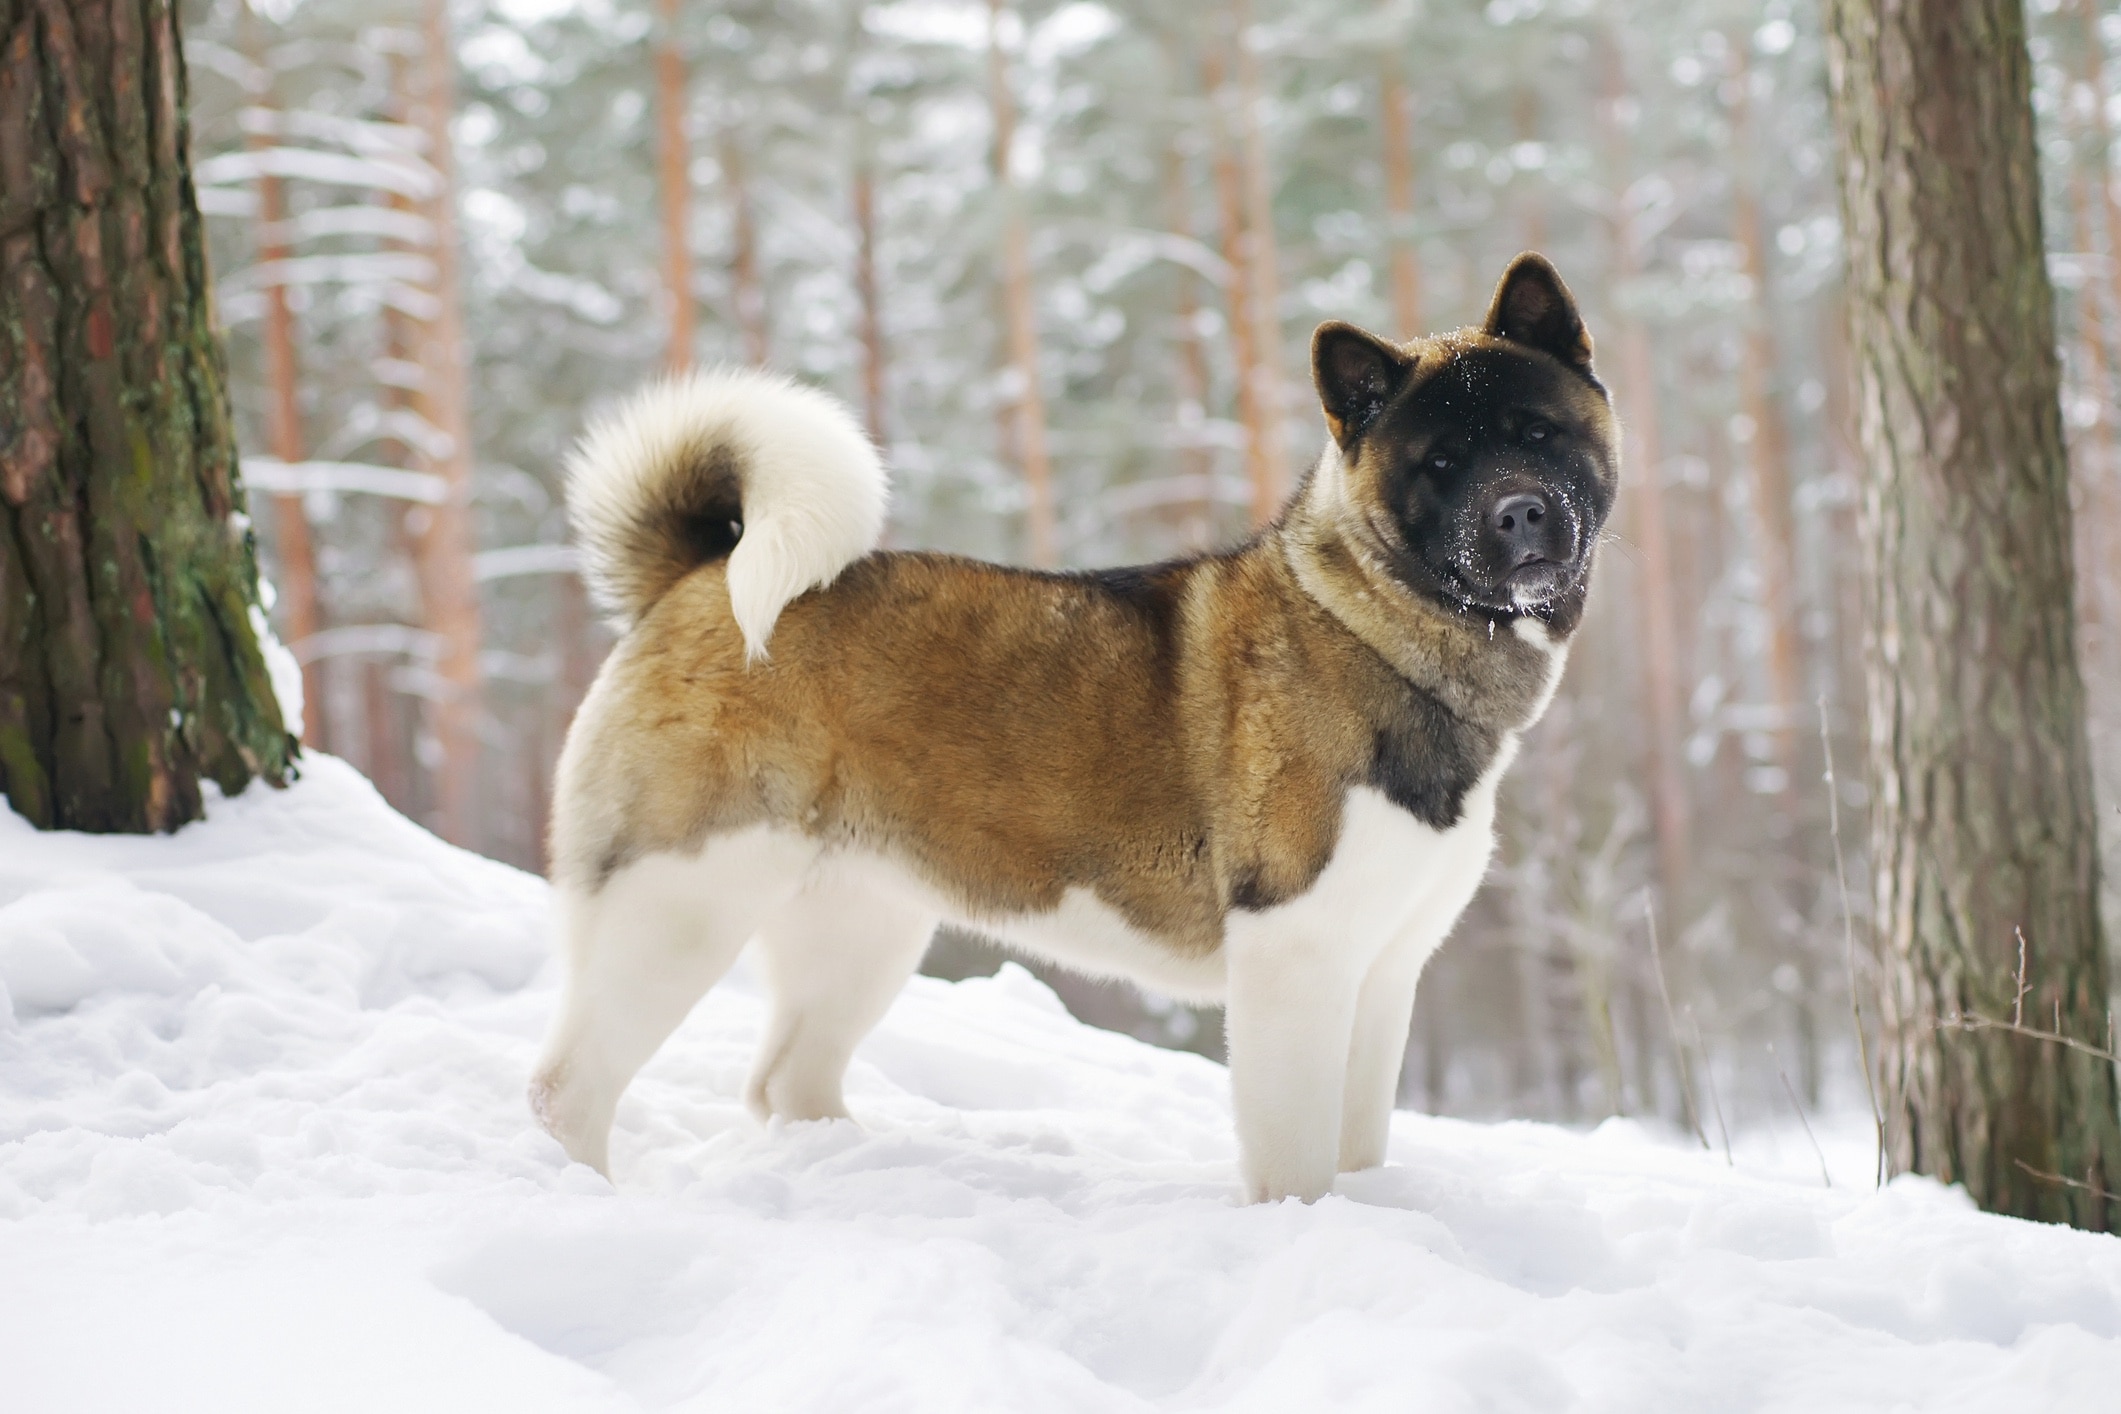 Tricolor Akita dog standing in a snowy forest